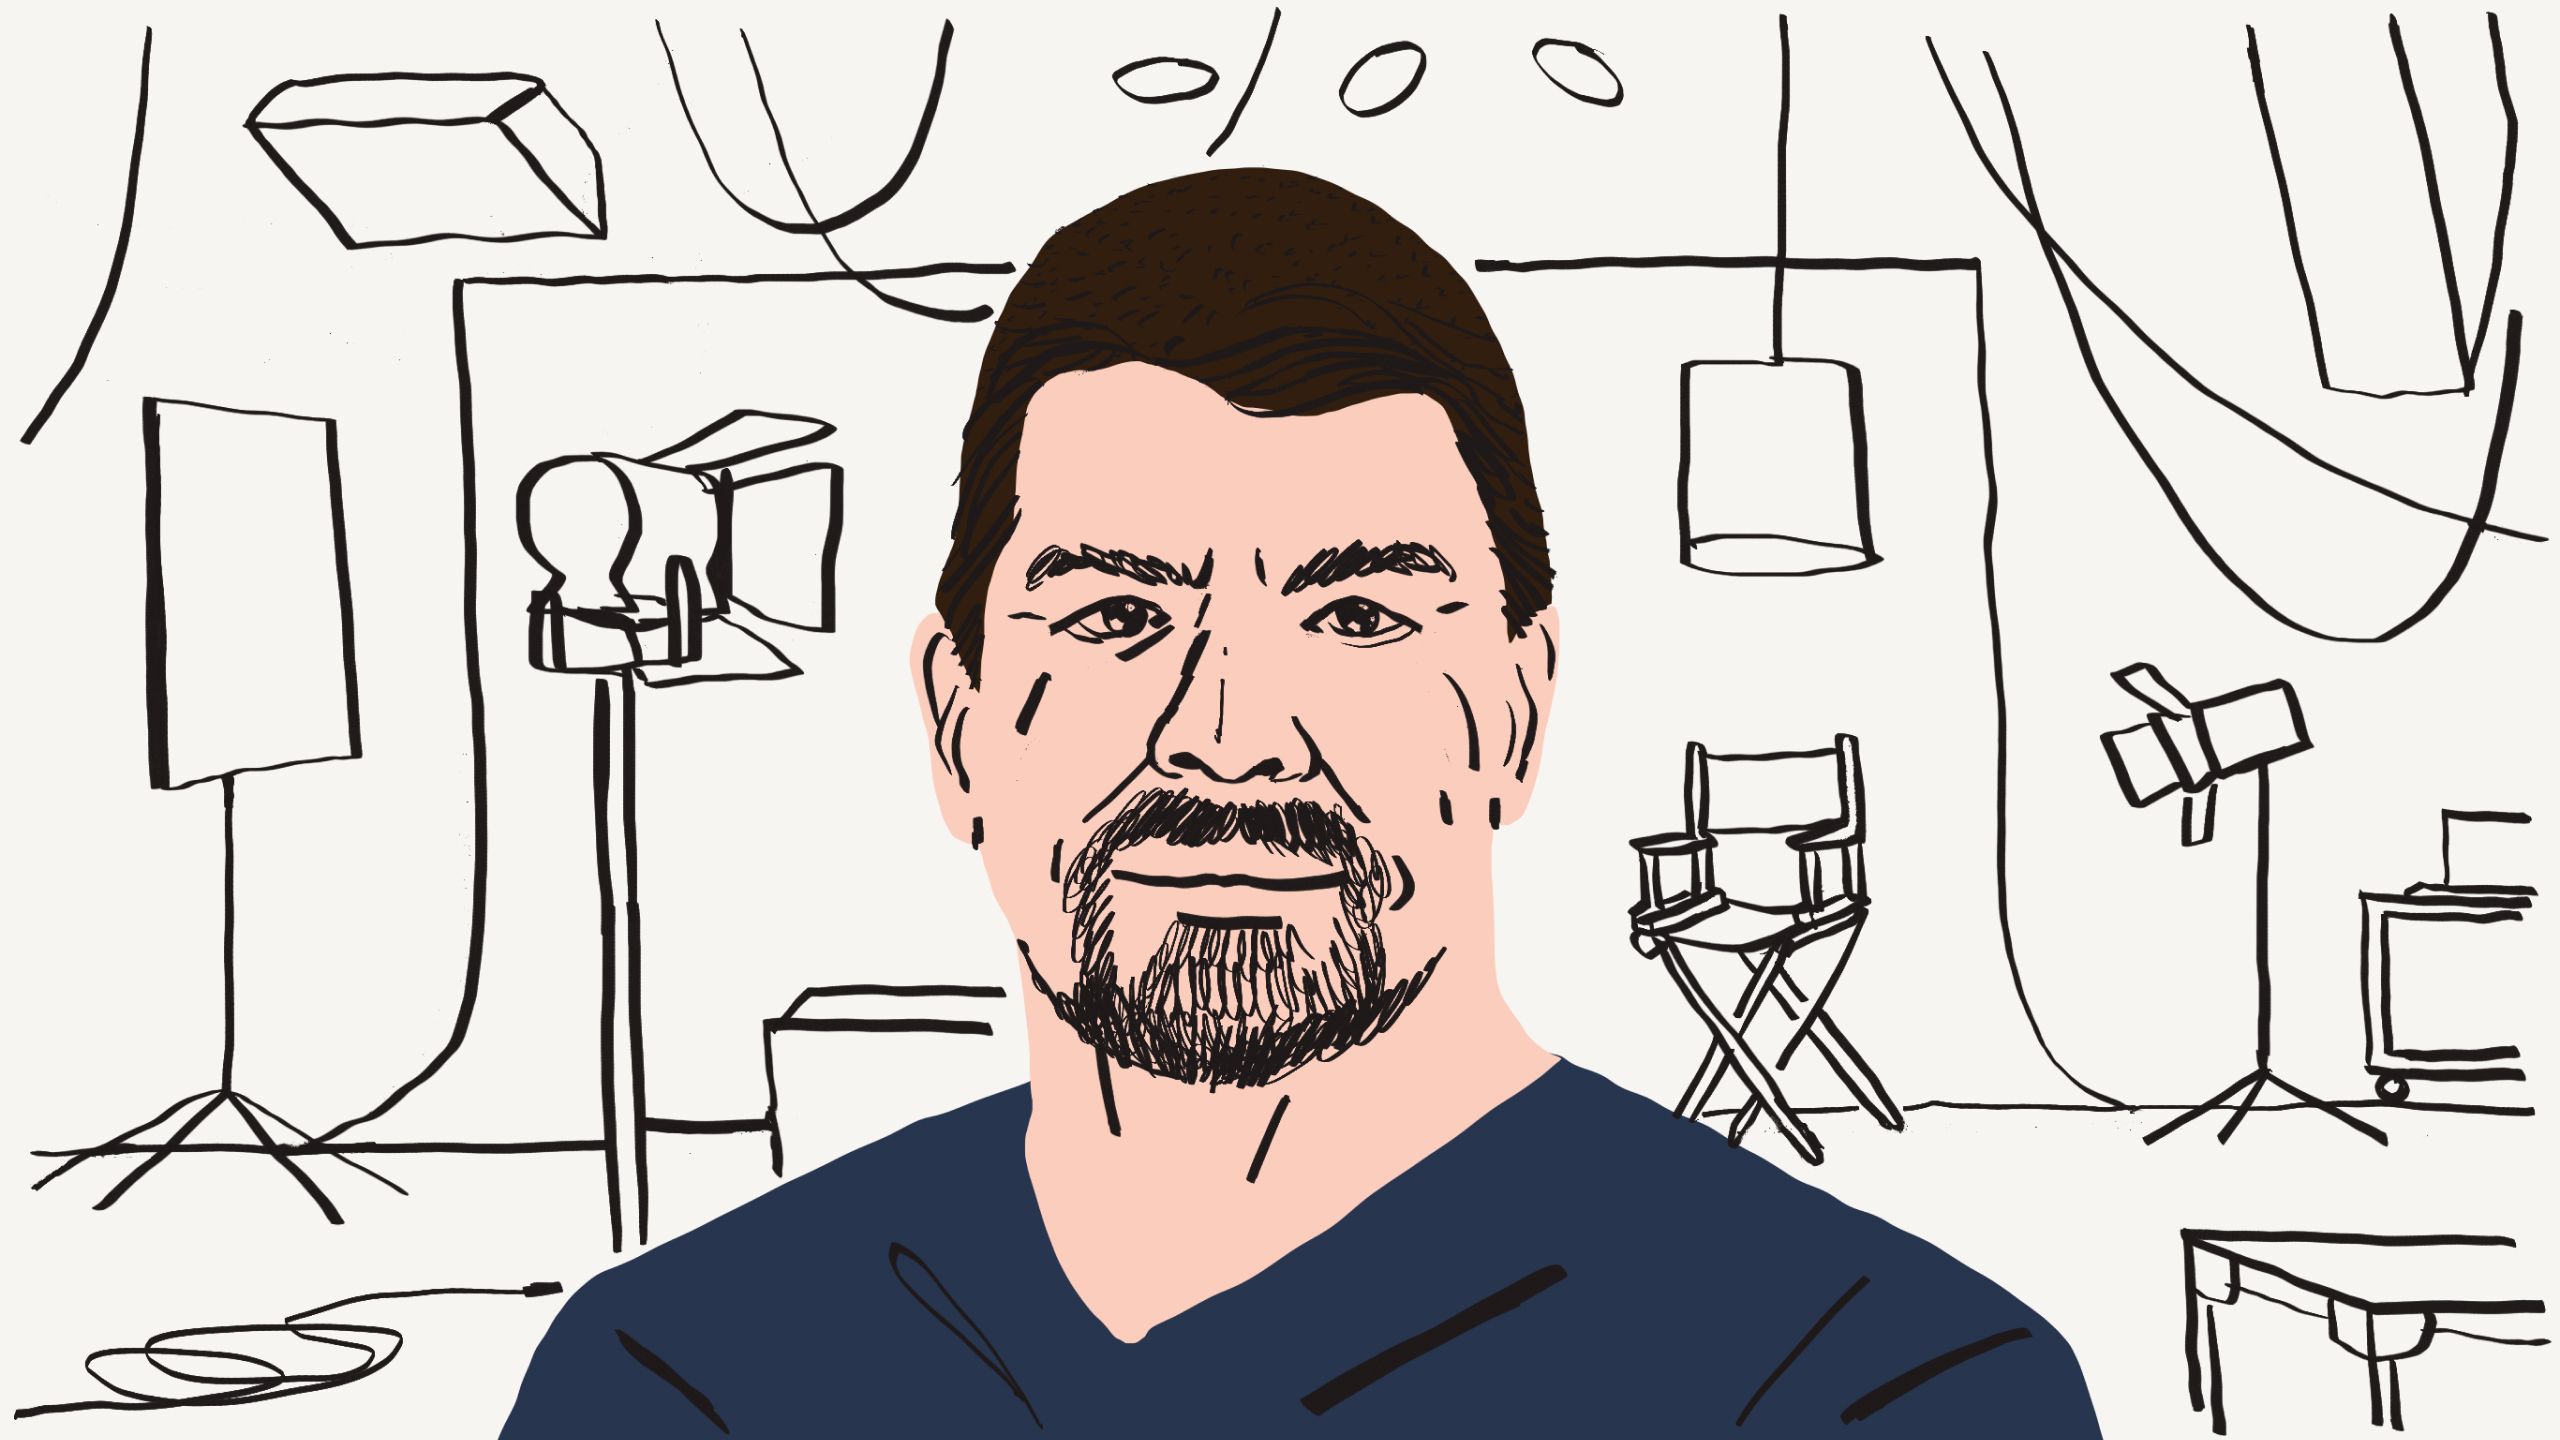 Illustration of a person wearing a blue shirt in front of a film light and directors chair